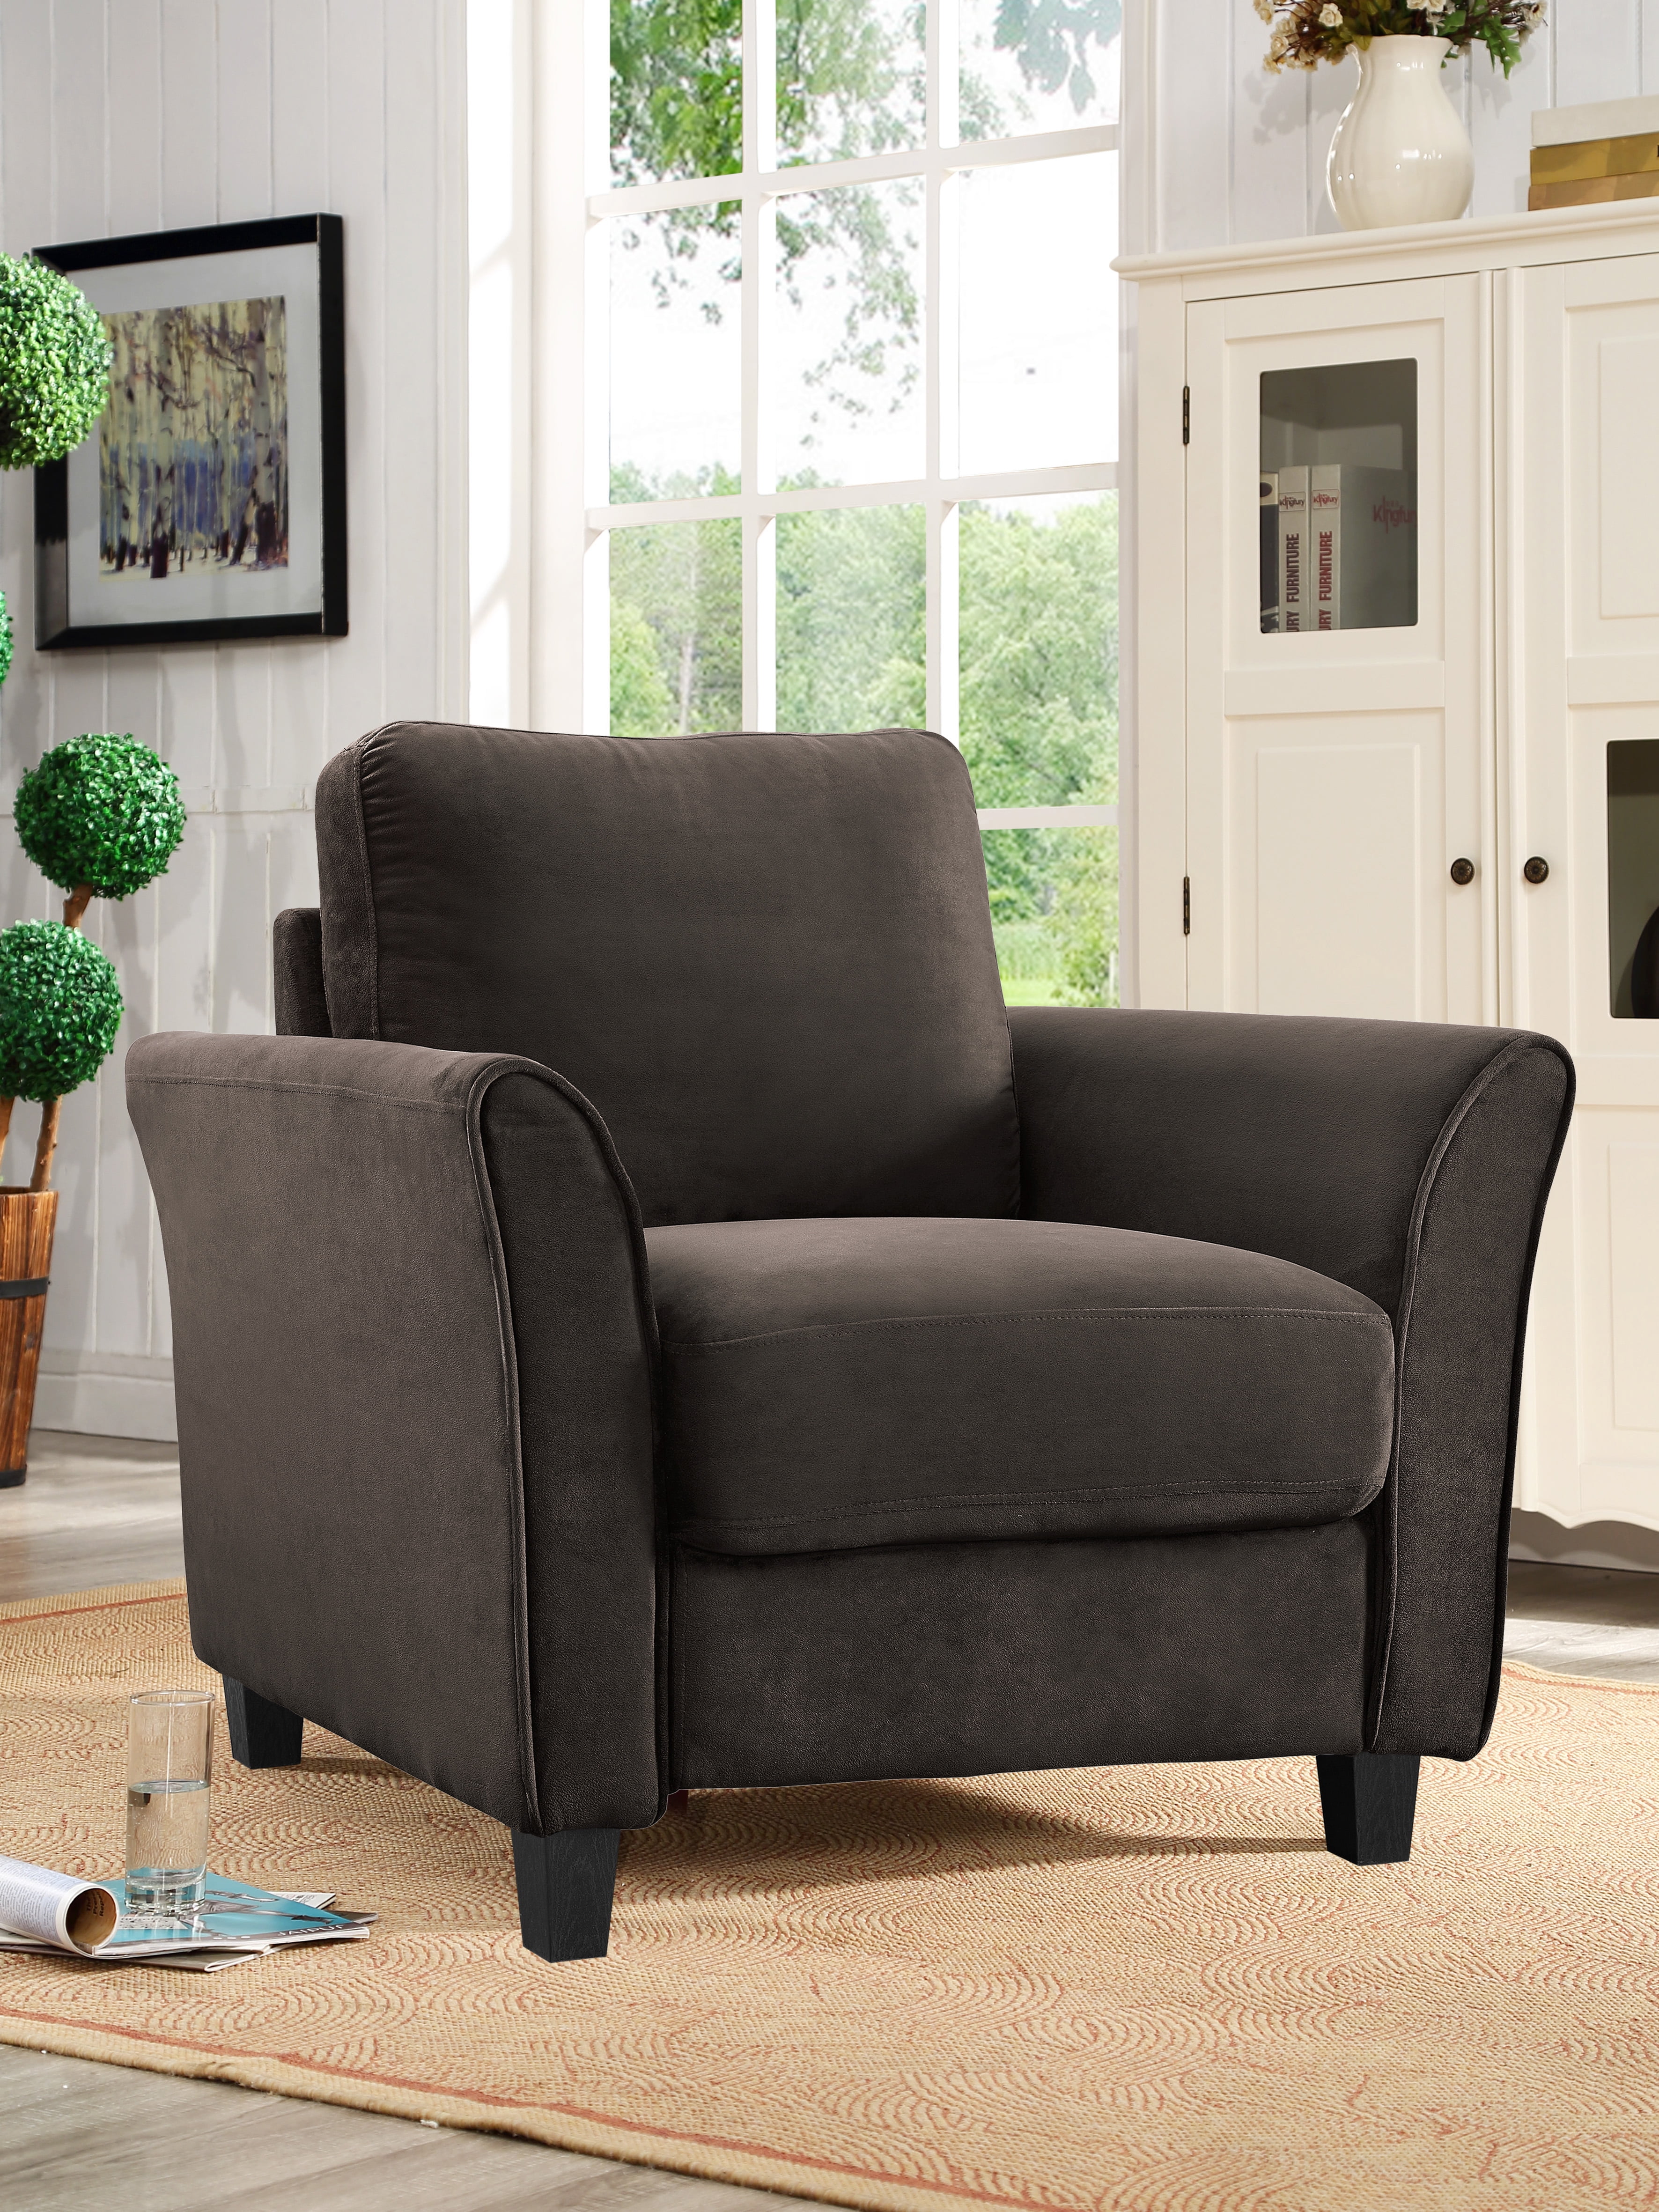 Lifestyle Solutions Alexa Club Chair, Brown Fabric 